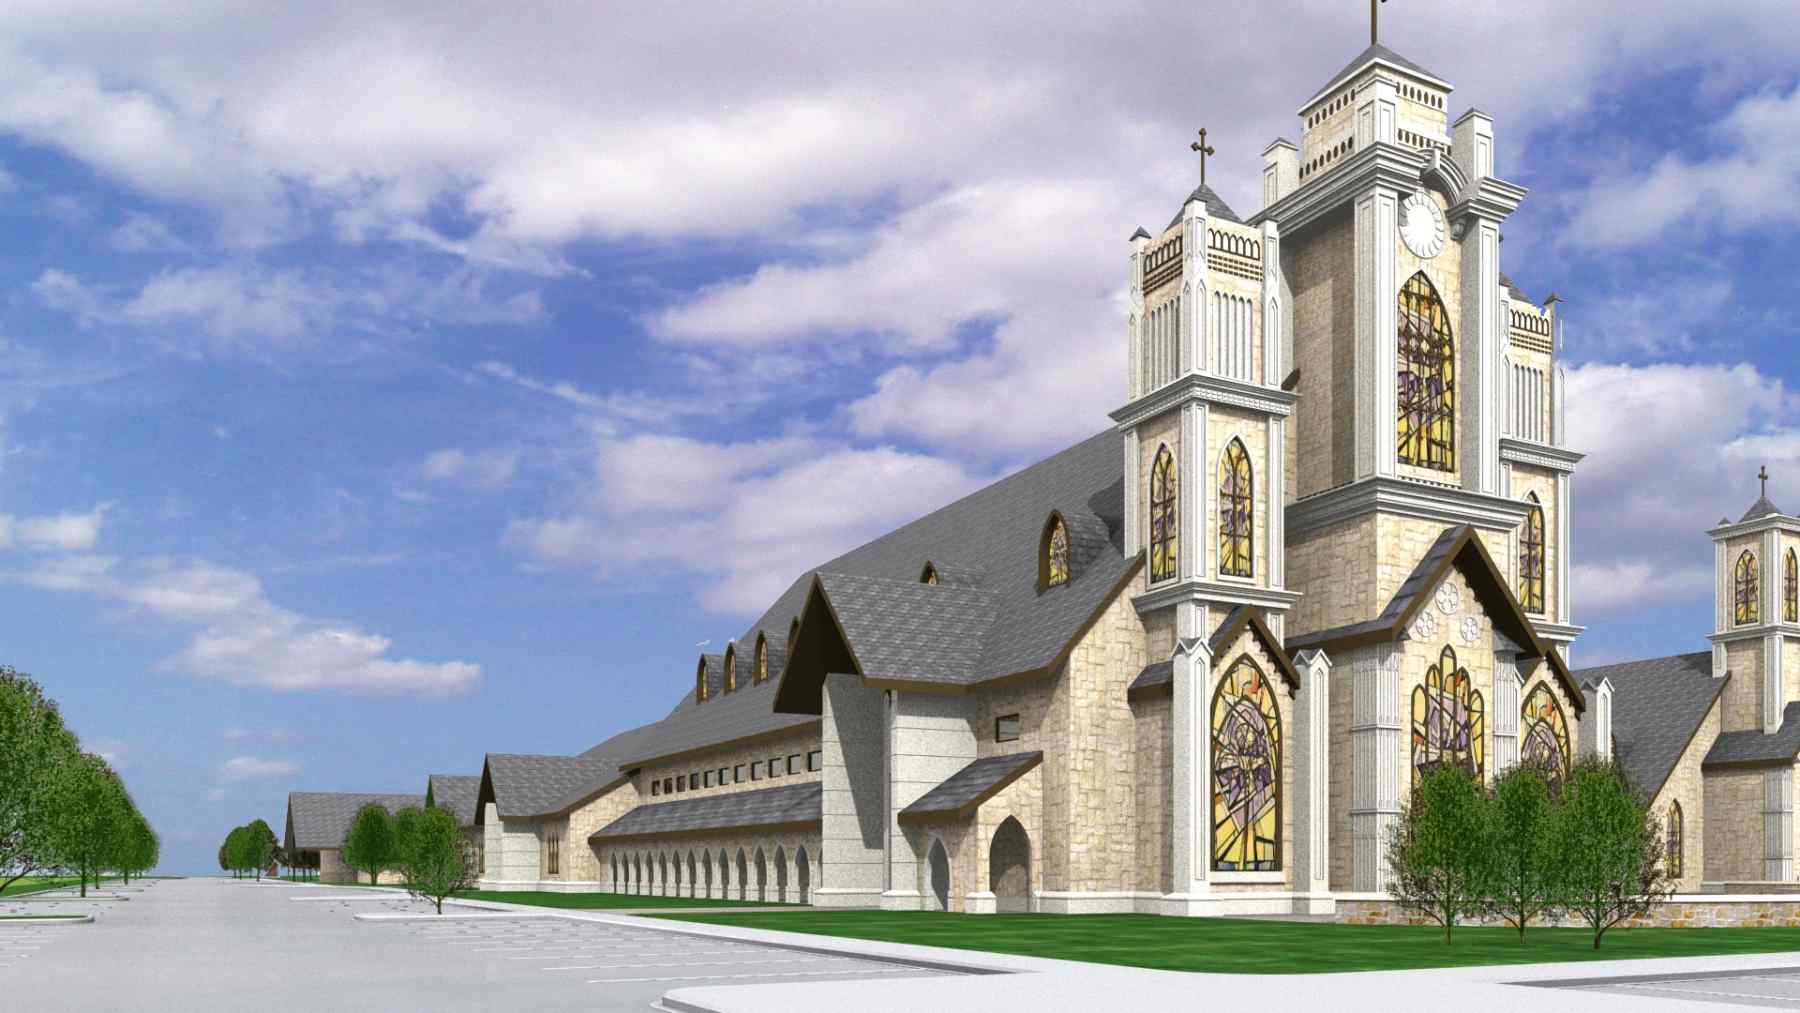 You Will Know You are in Good Hands with a Professional Interior Church Architecture Designer